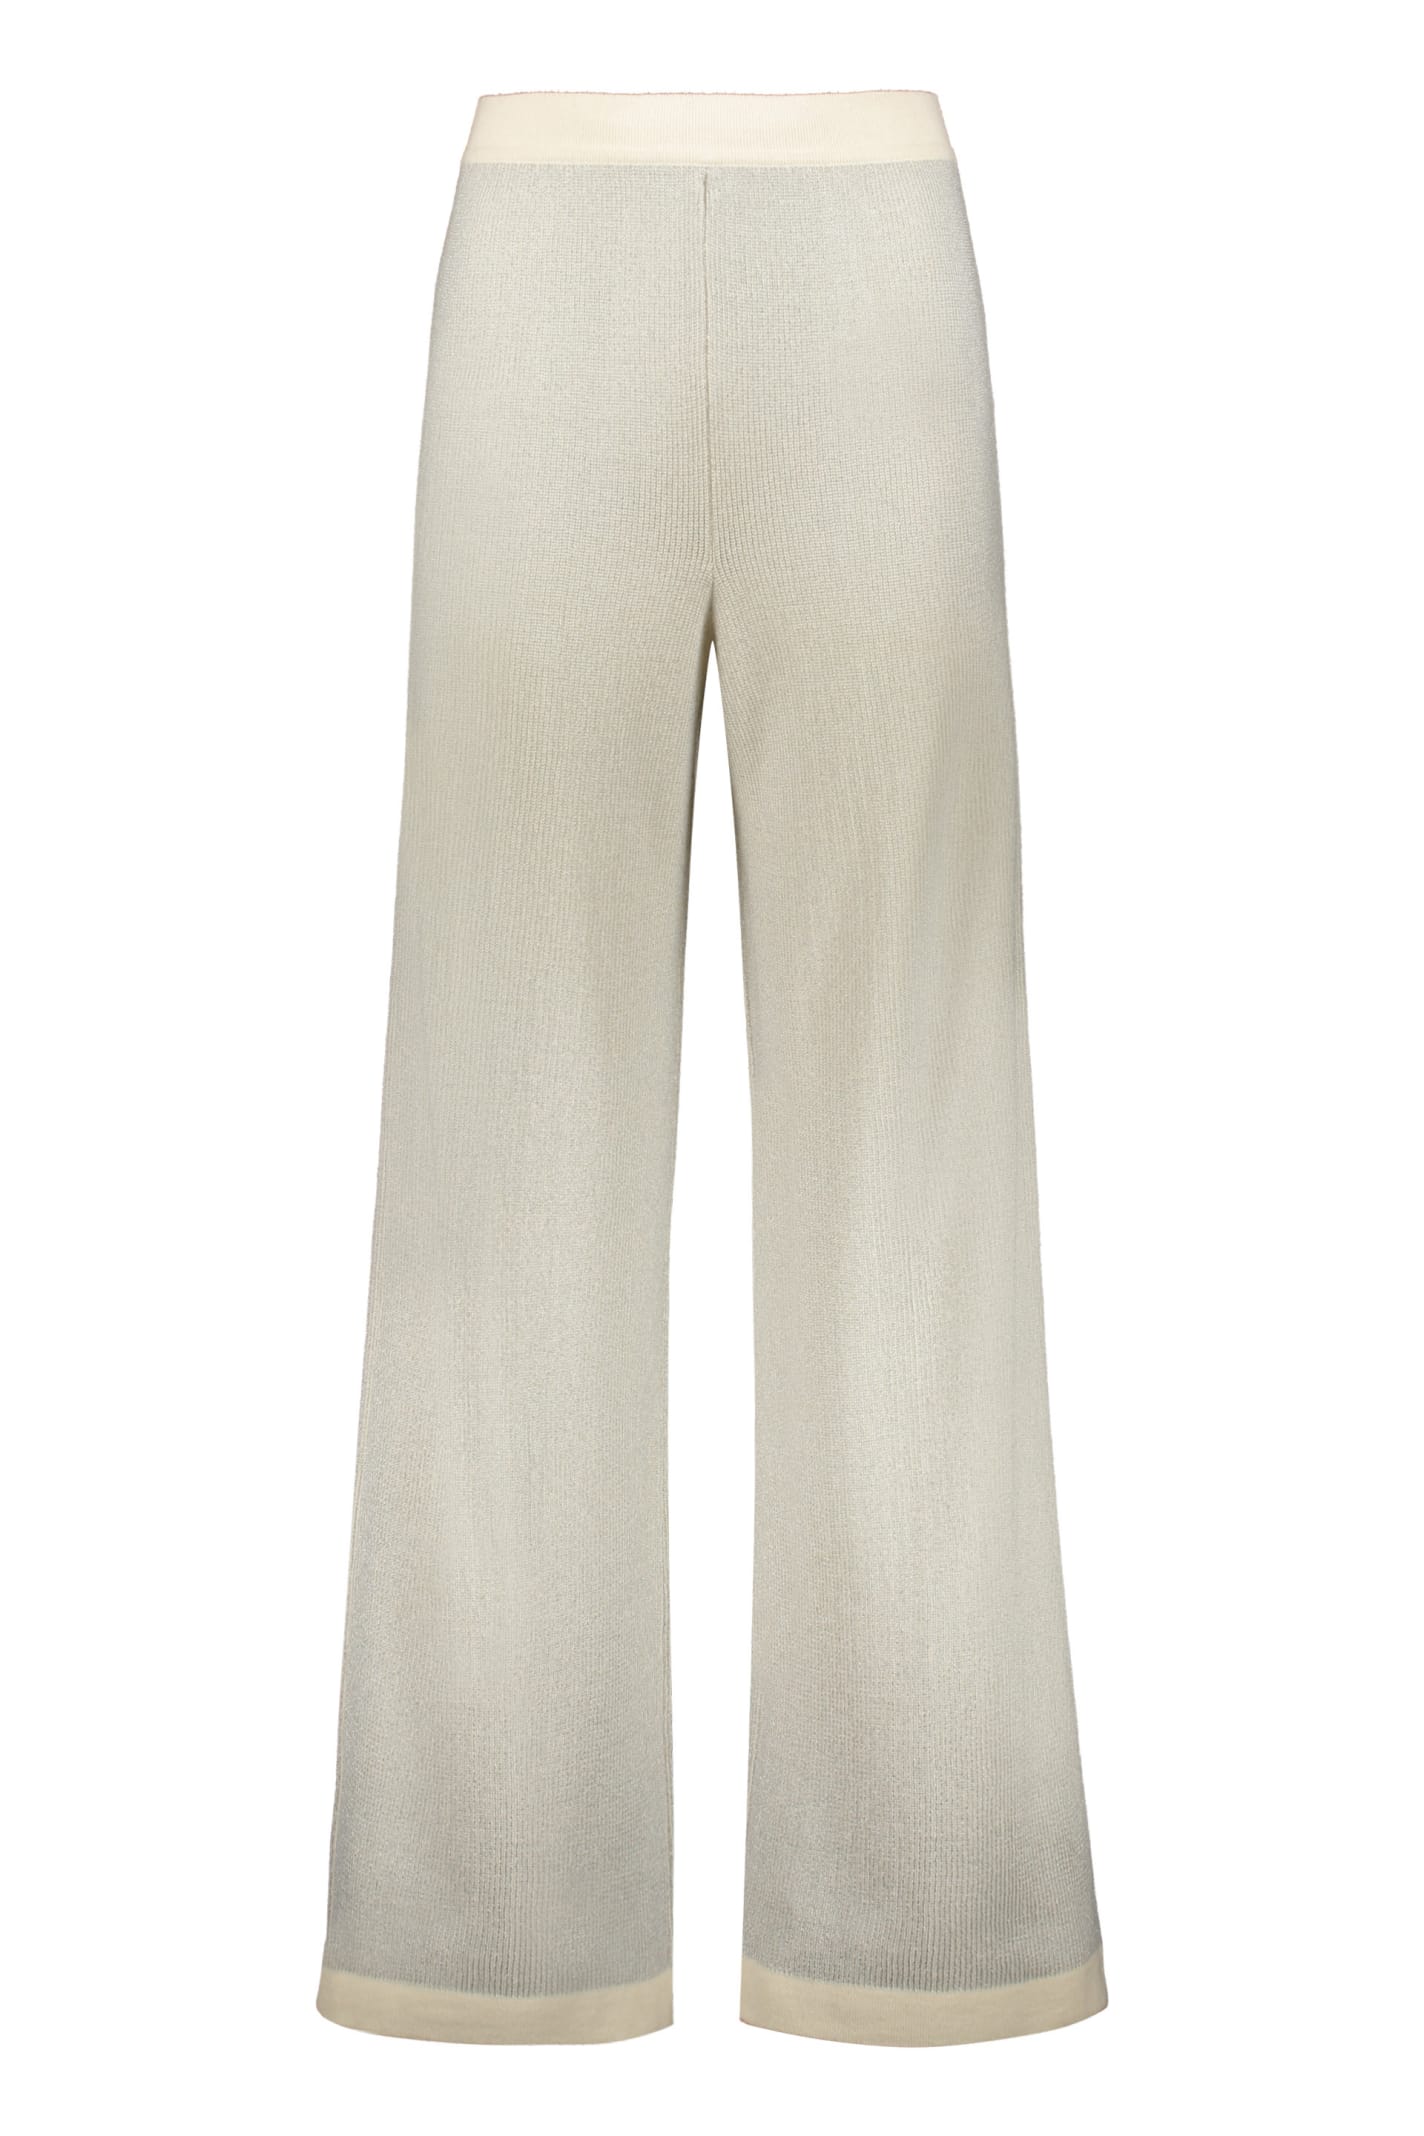 Missoni Lurex Knit Trousers In White